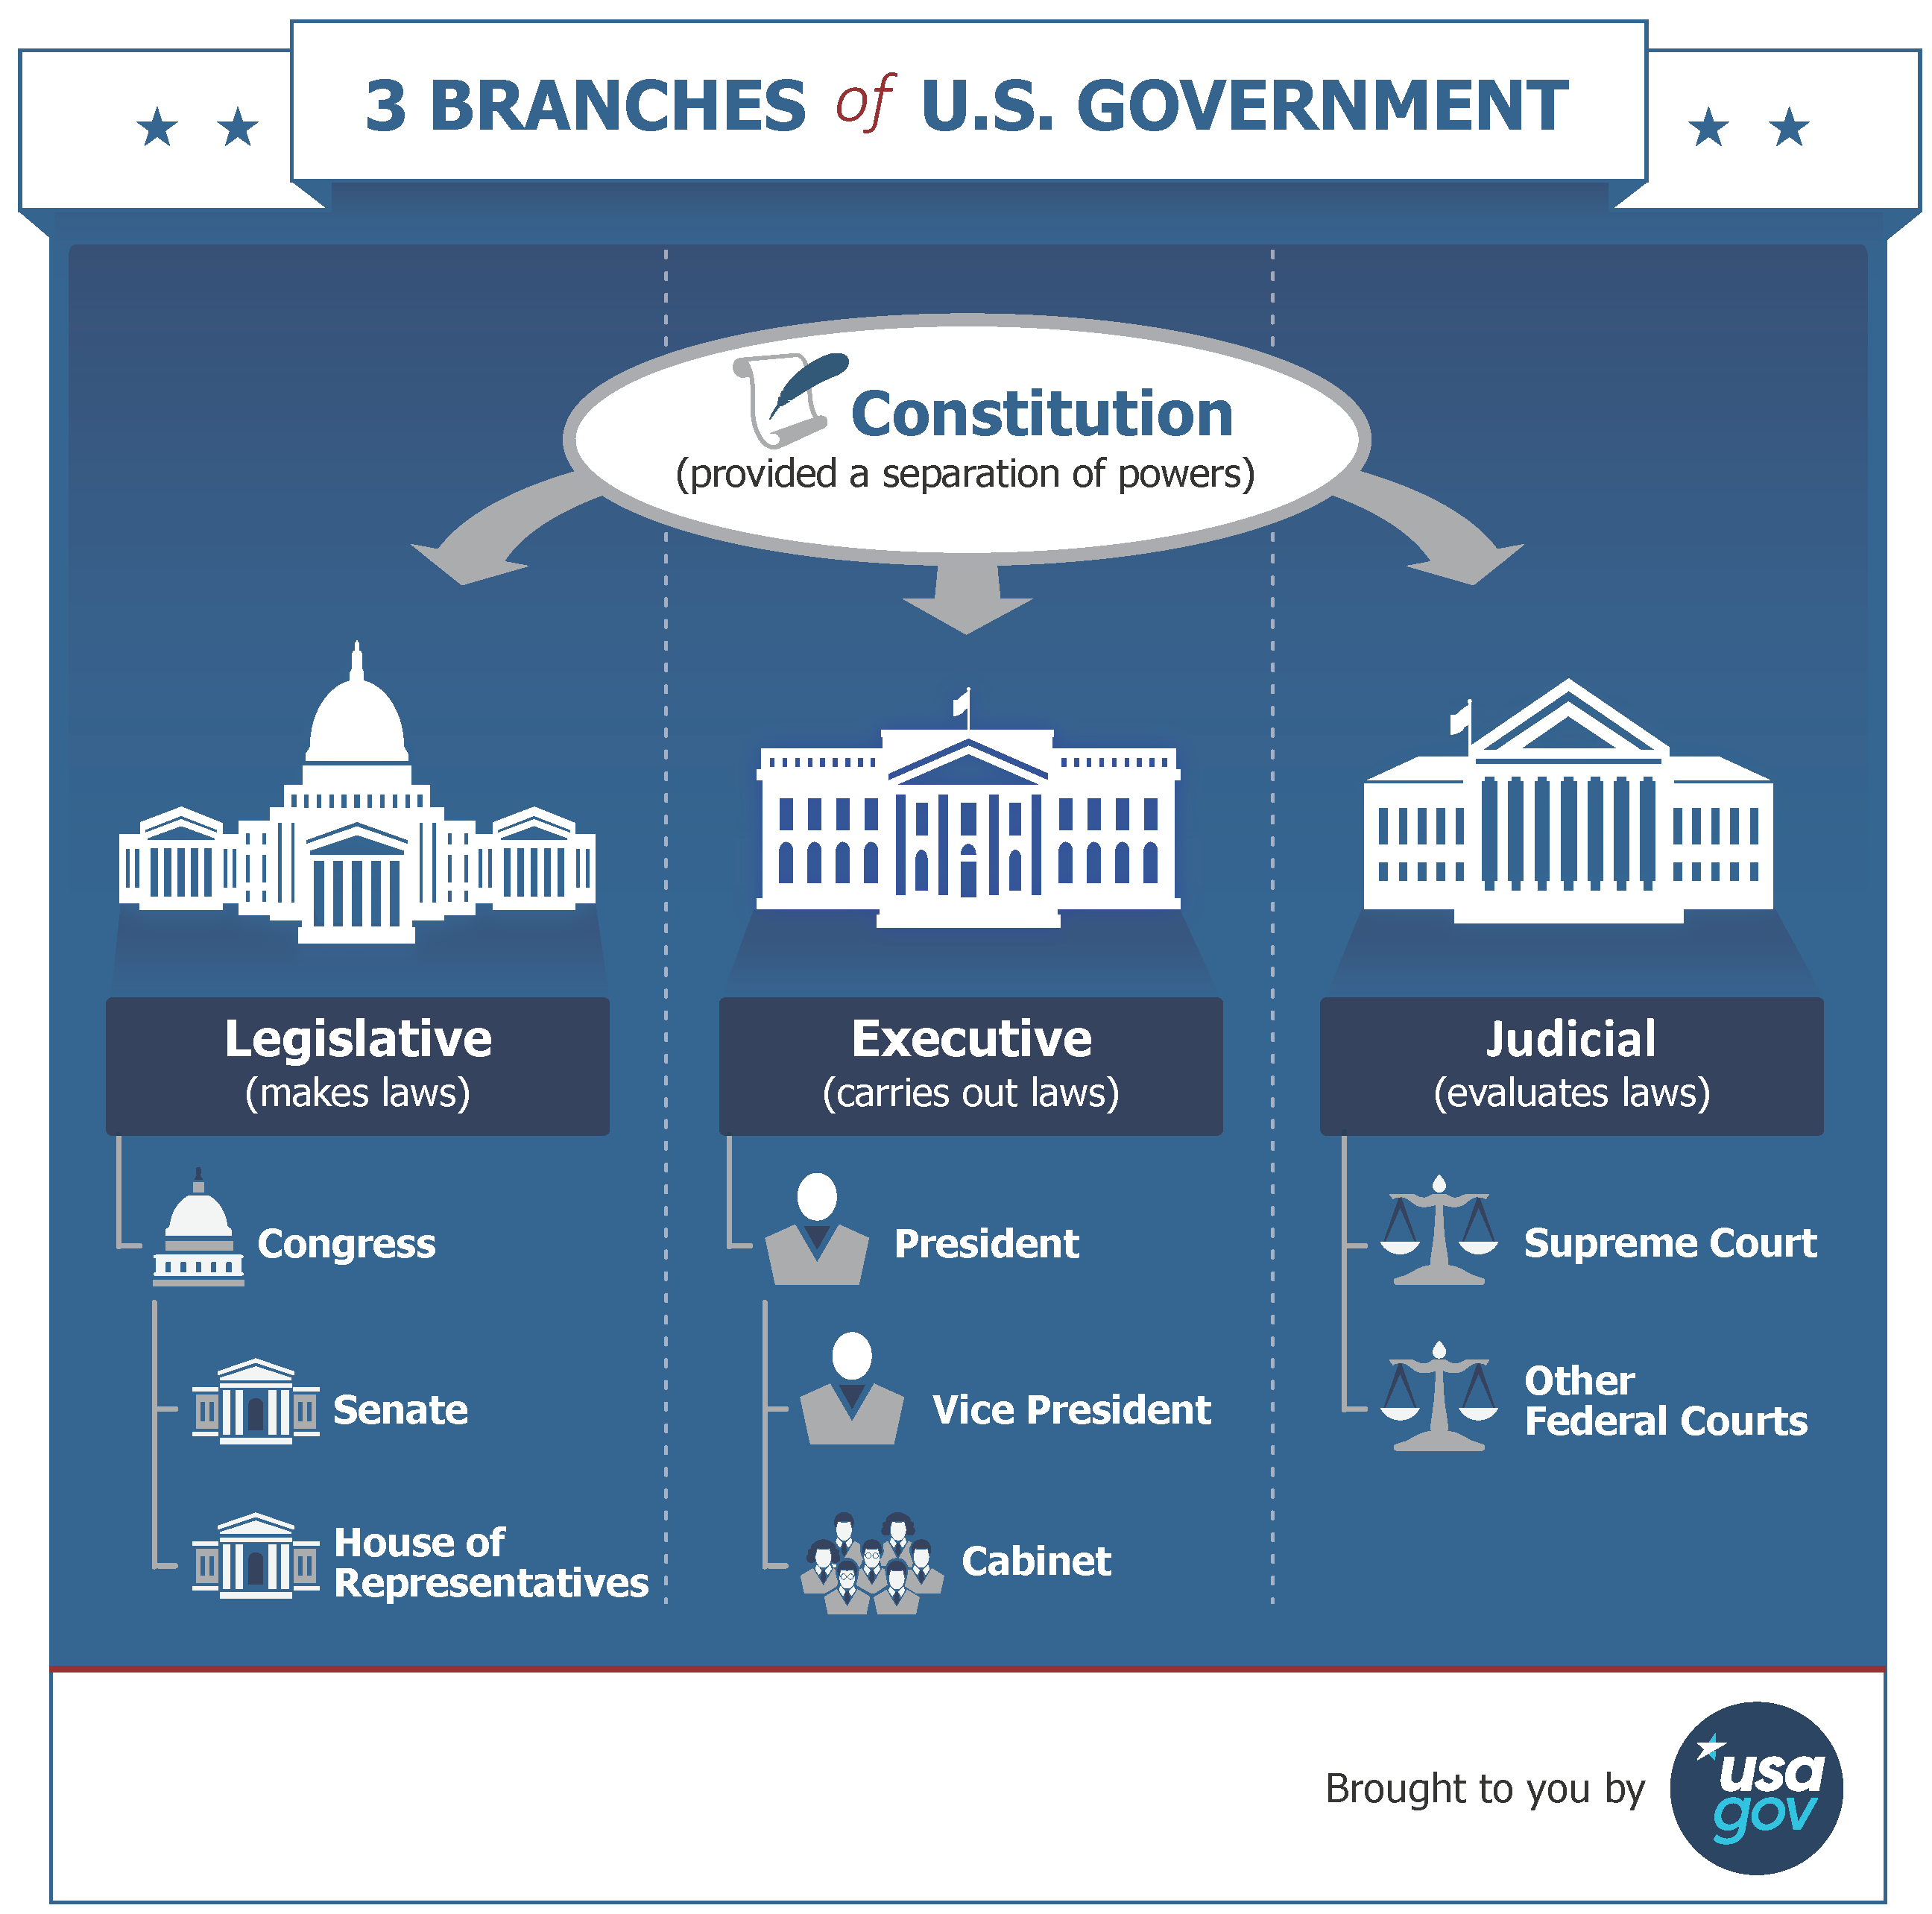 3 Branches of the U.S. Government